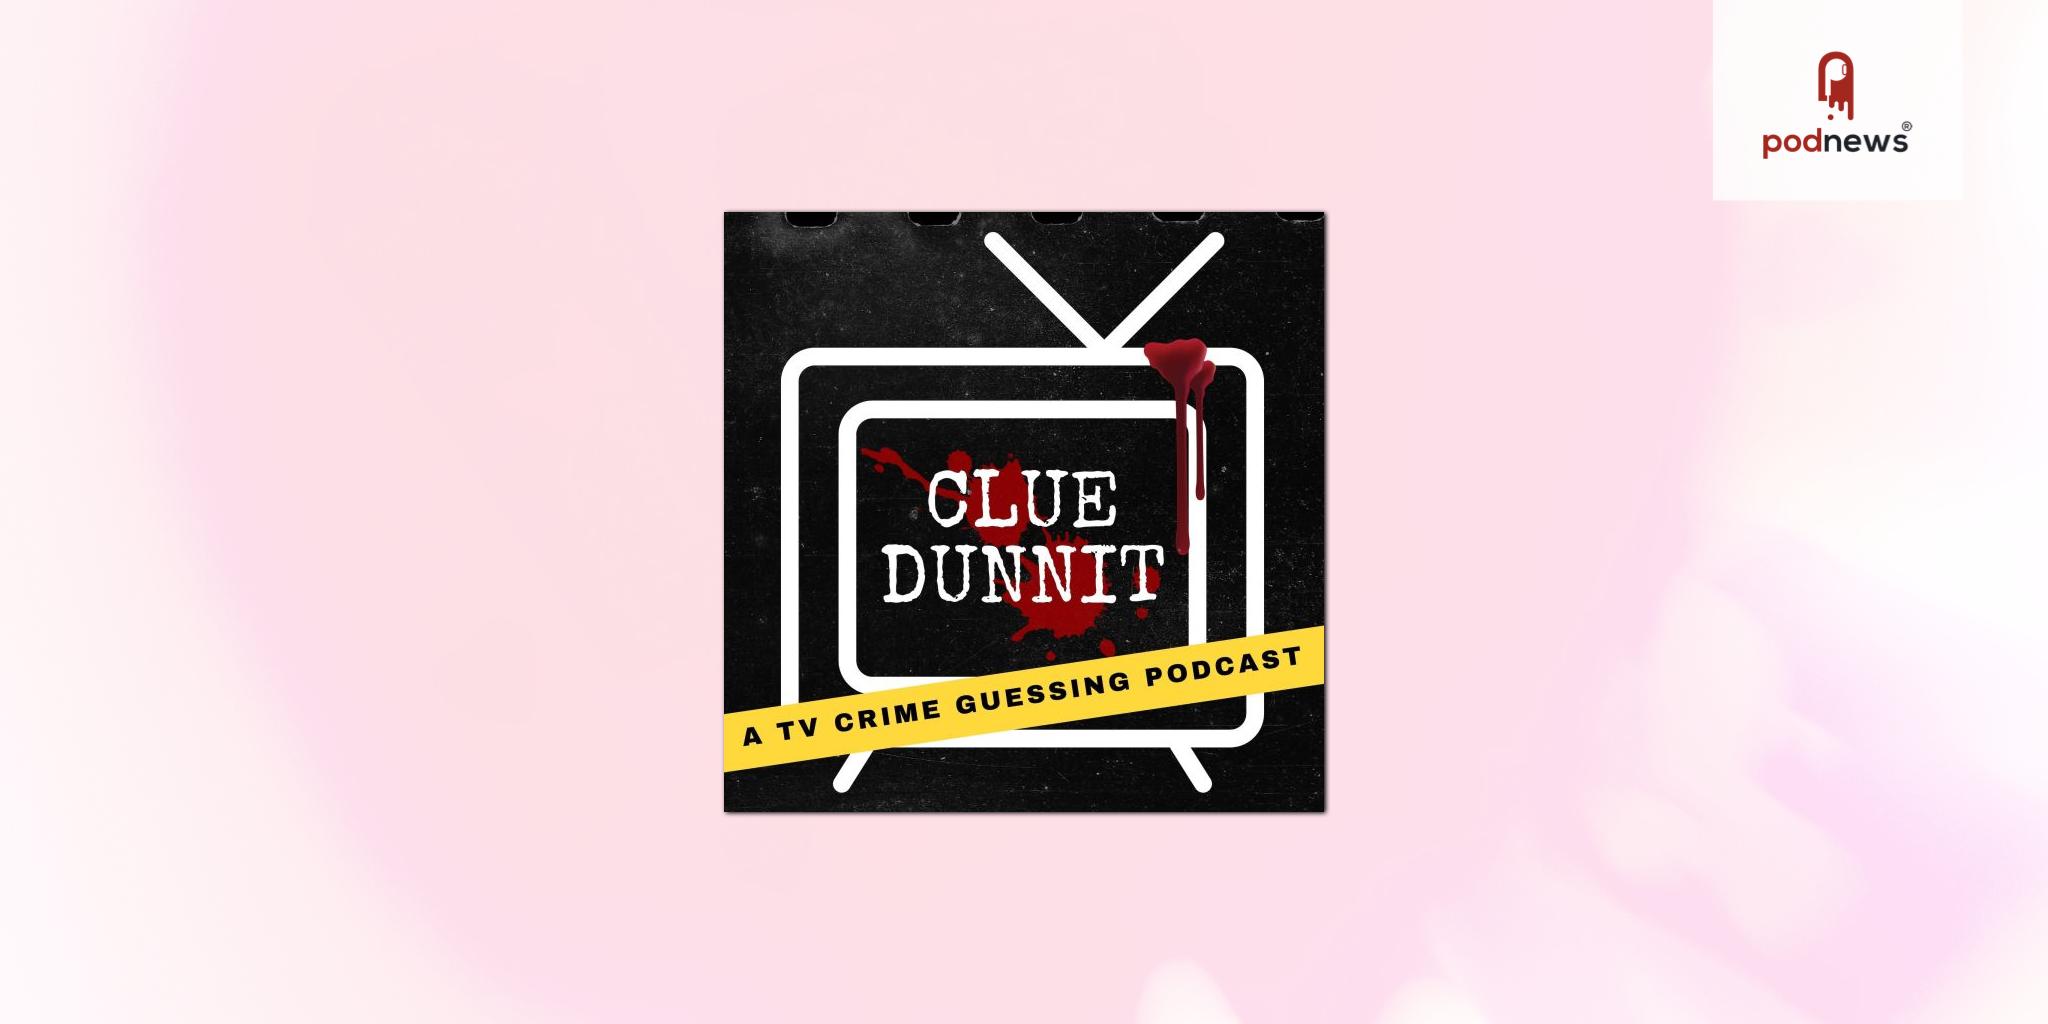 Cluedunnit Podcast, the comedy podcast that plays the game of TV mystery procedurals and making wild guesses